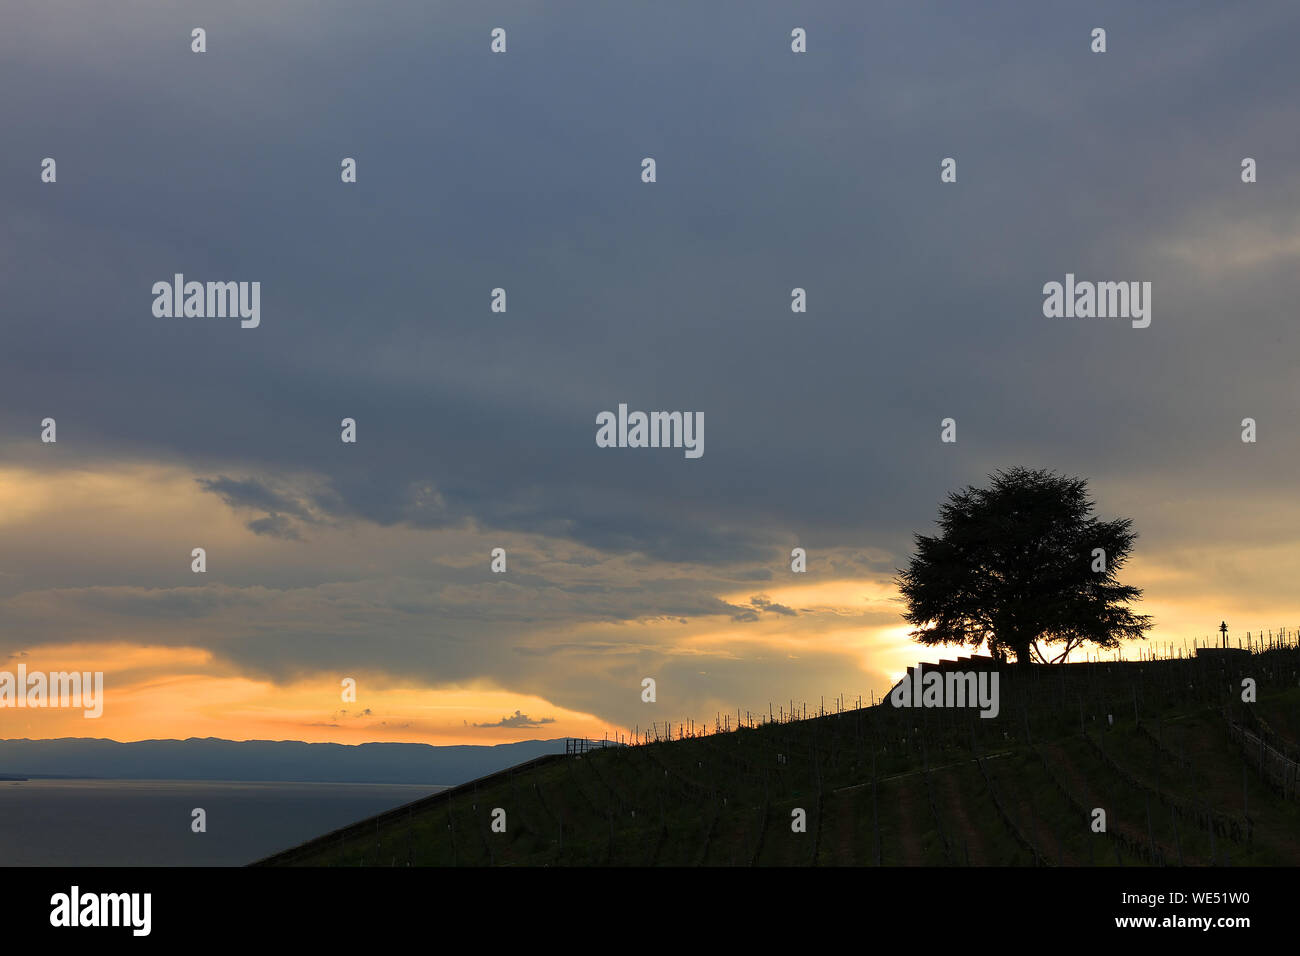 Silhouette Tree On Hill Against Cloudy Sky During Sunset Stock Photo